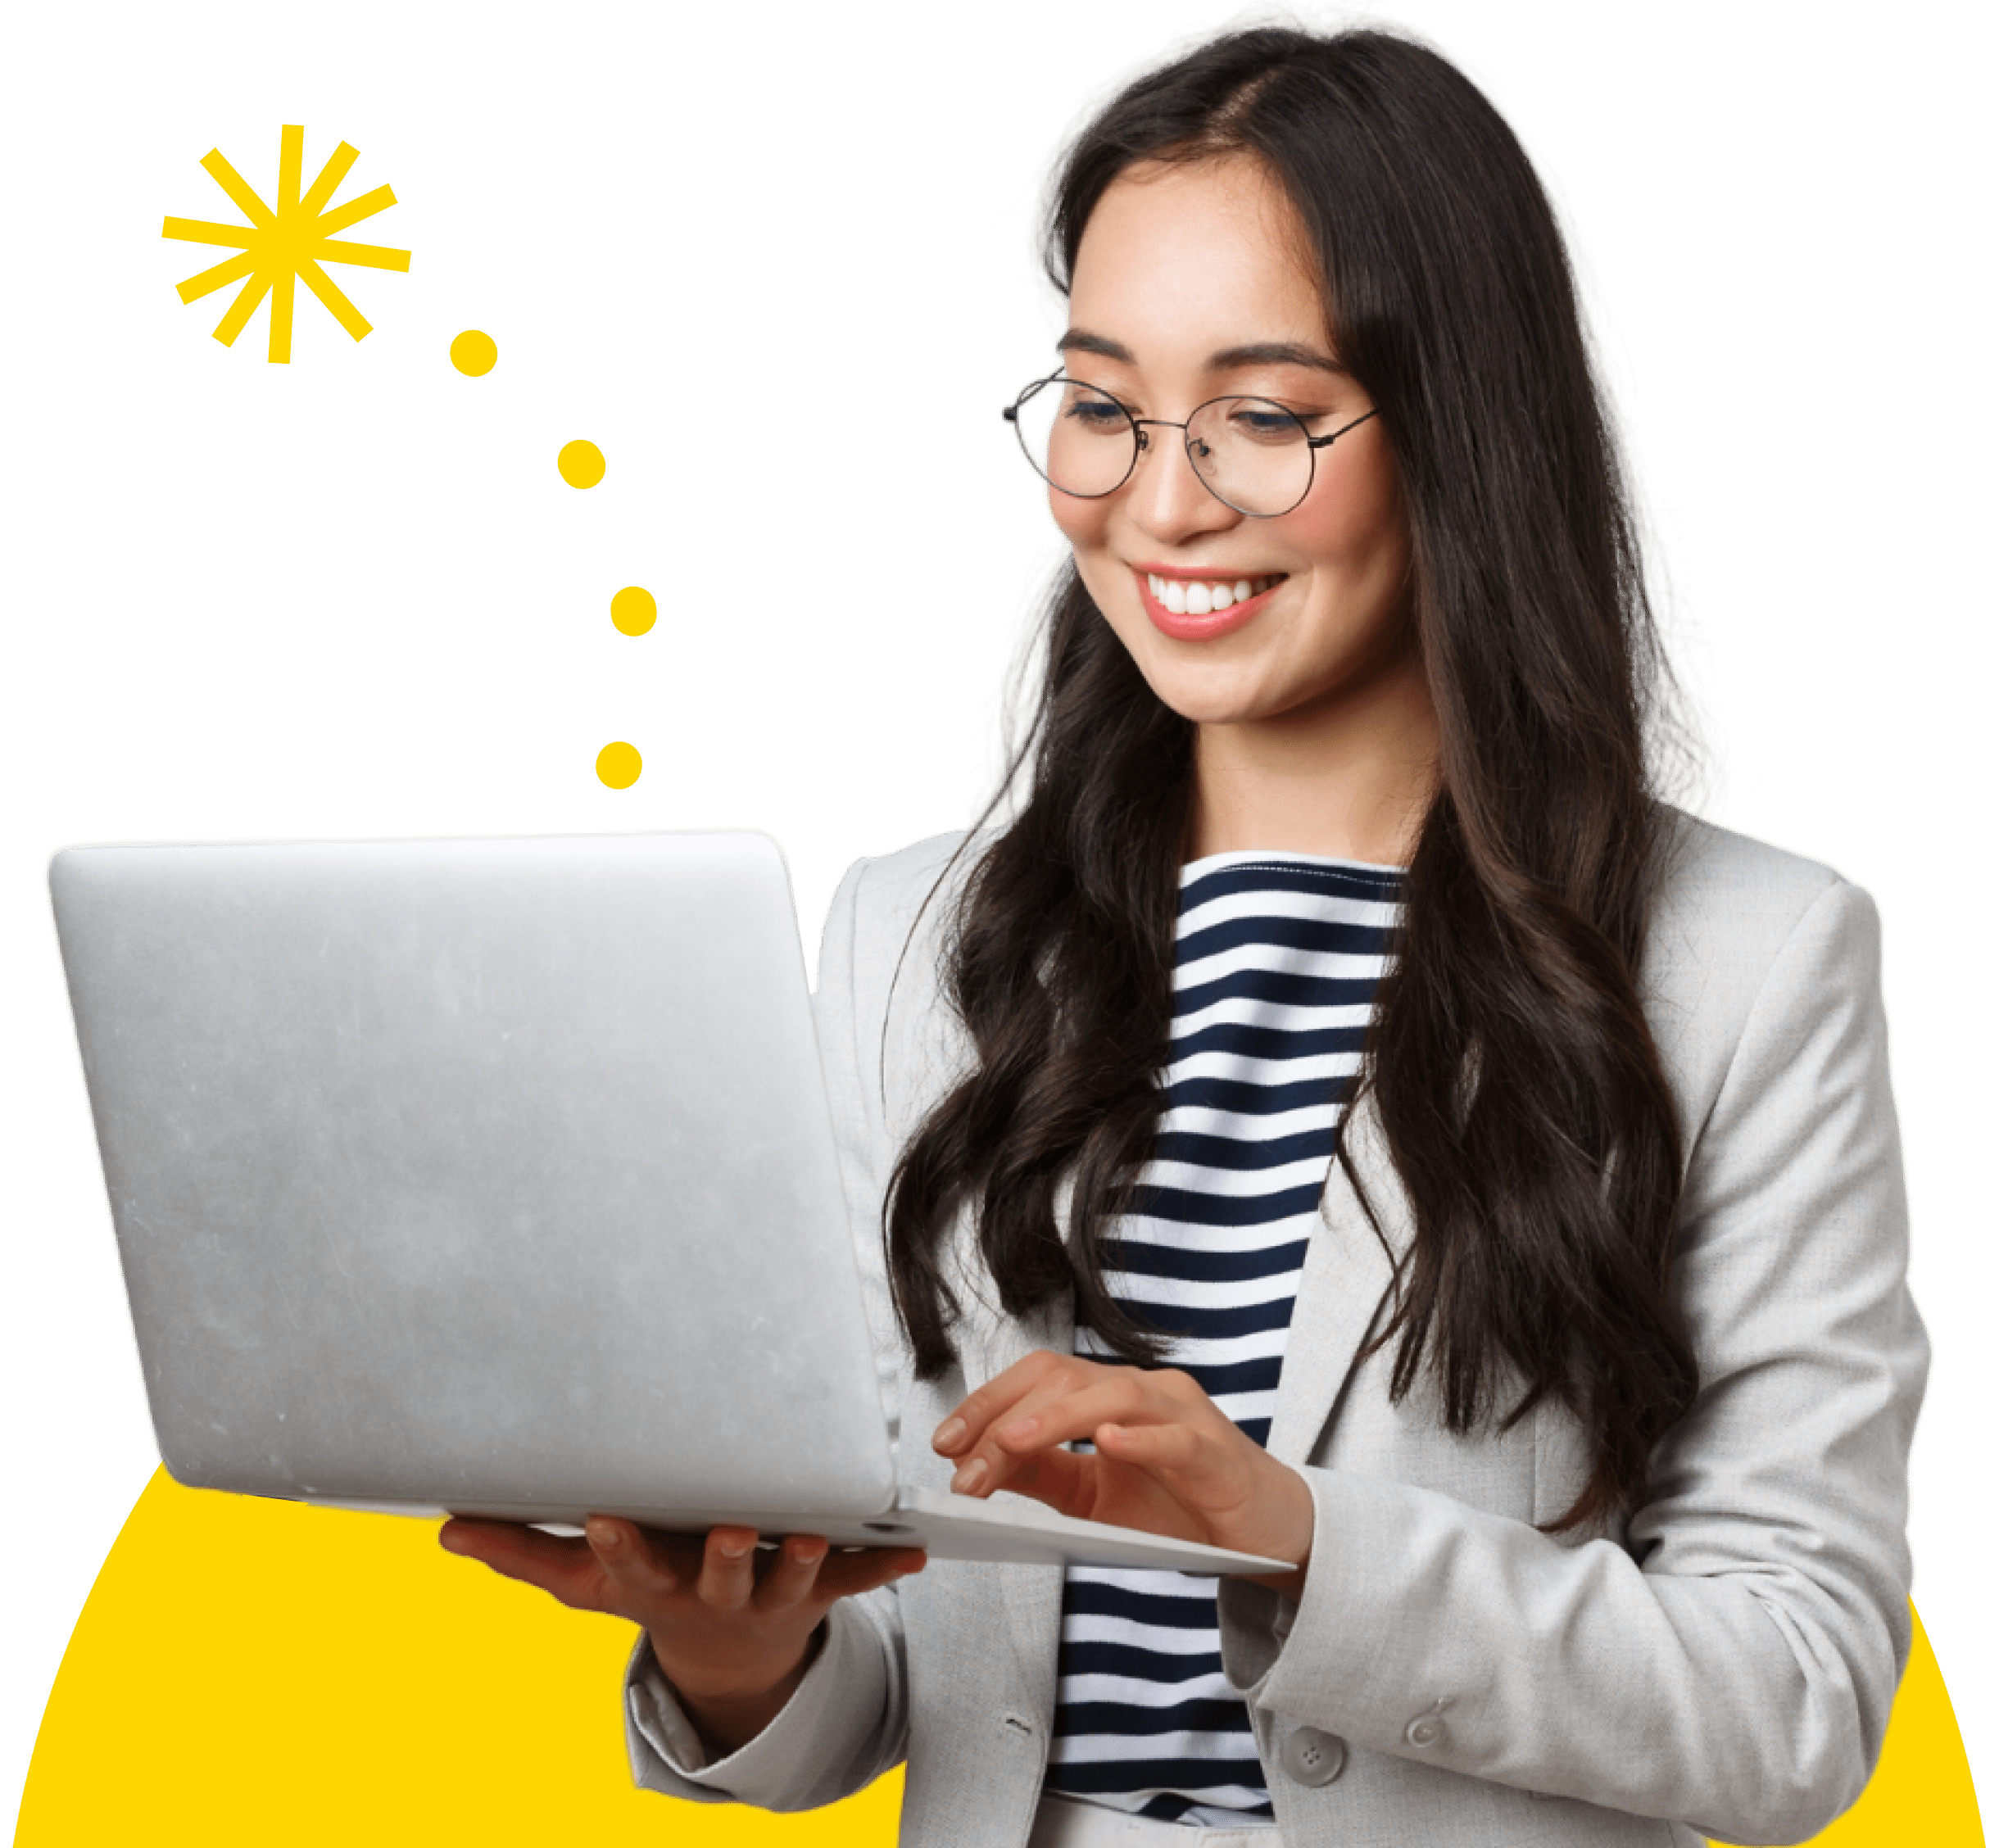 Woman holding a laptop and smiling with yellow graphics in the background.